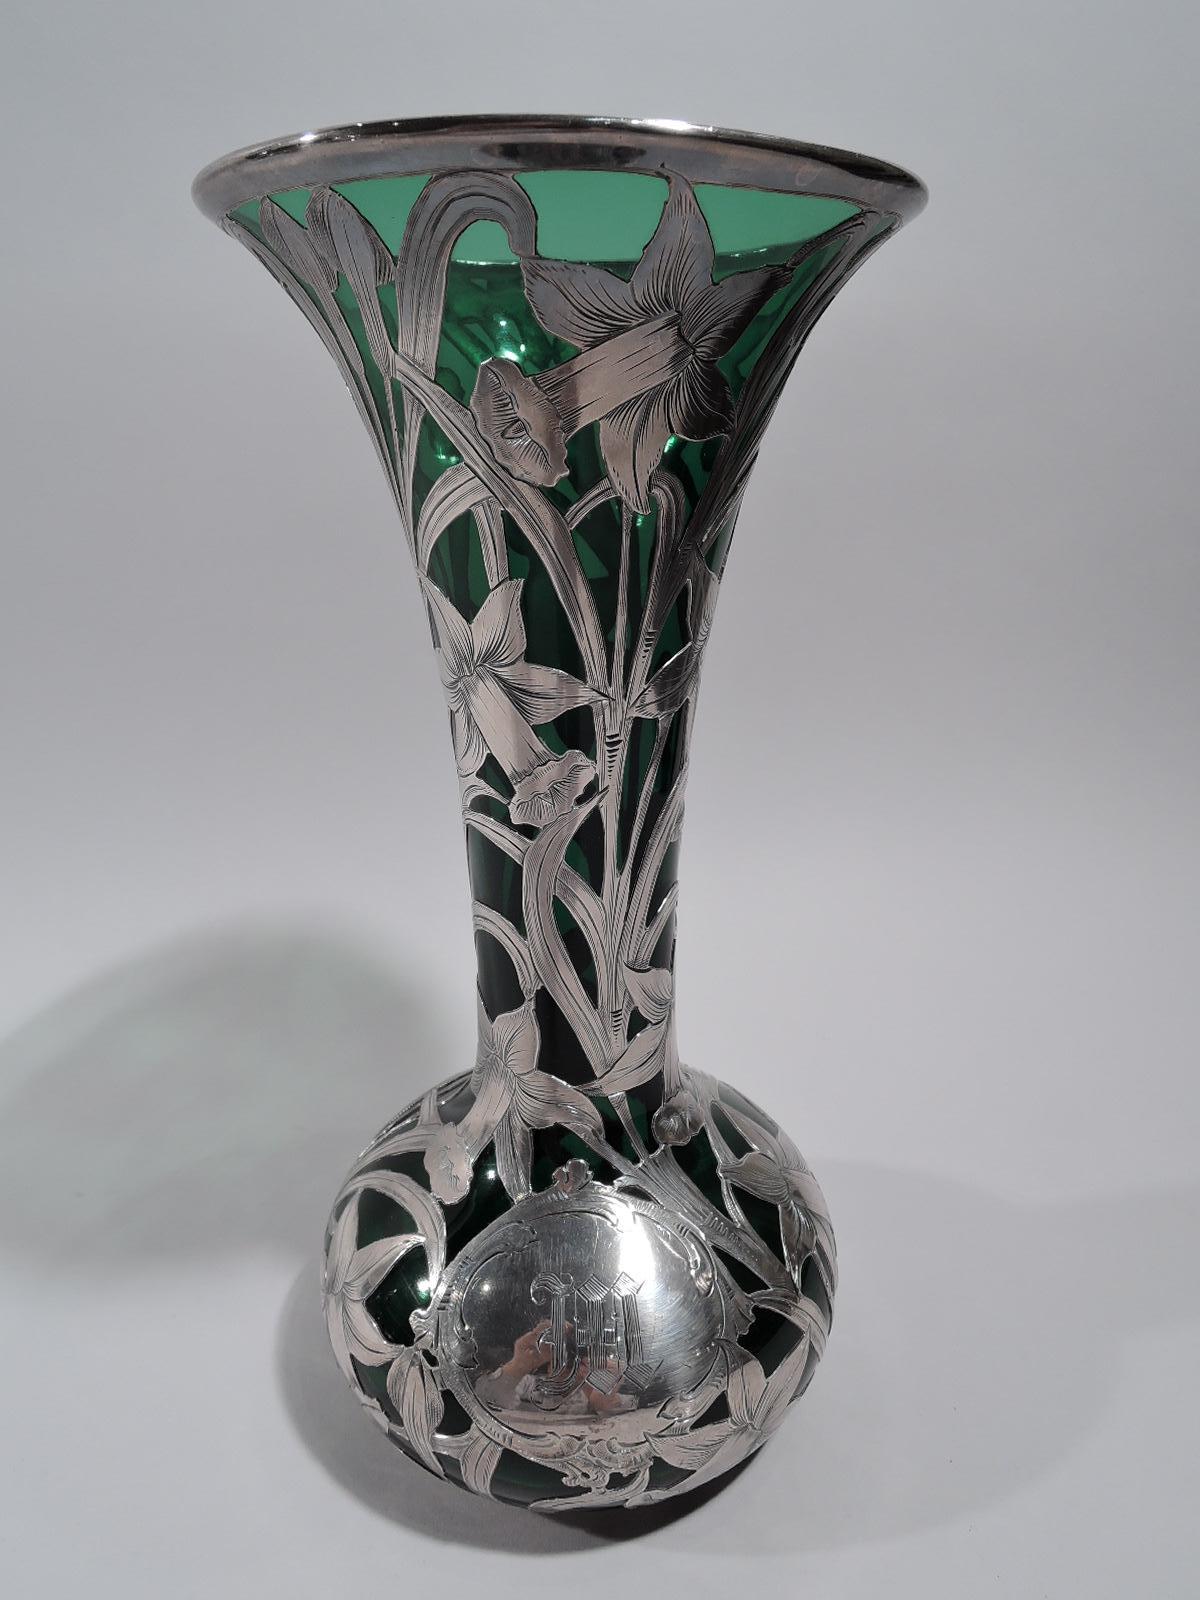 Turn-of-the-century Art Nouveau green glass vase with engraved silver floral overlay. Conical mouth and neck, and bellied bowl. Overlay in form of daffodils with entwined and overlapping flower heads and stems. A pretty example of putting the